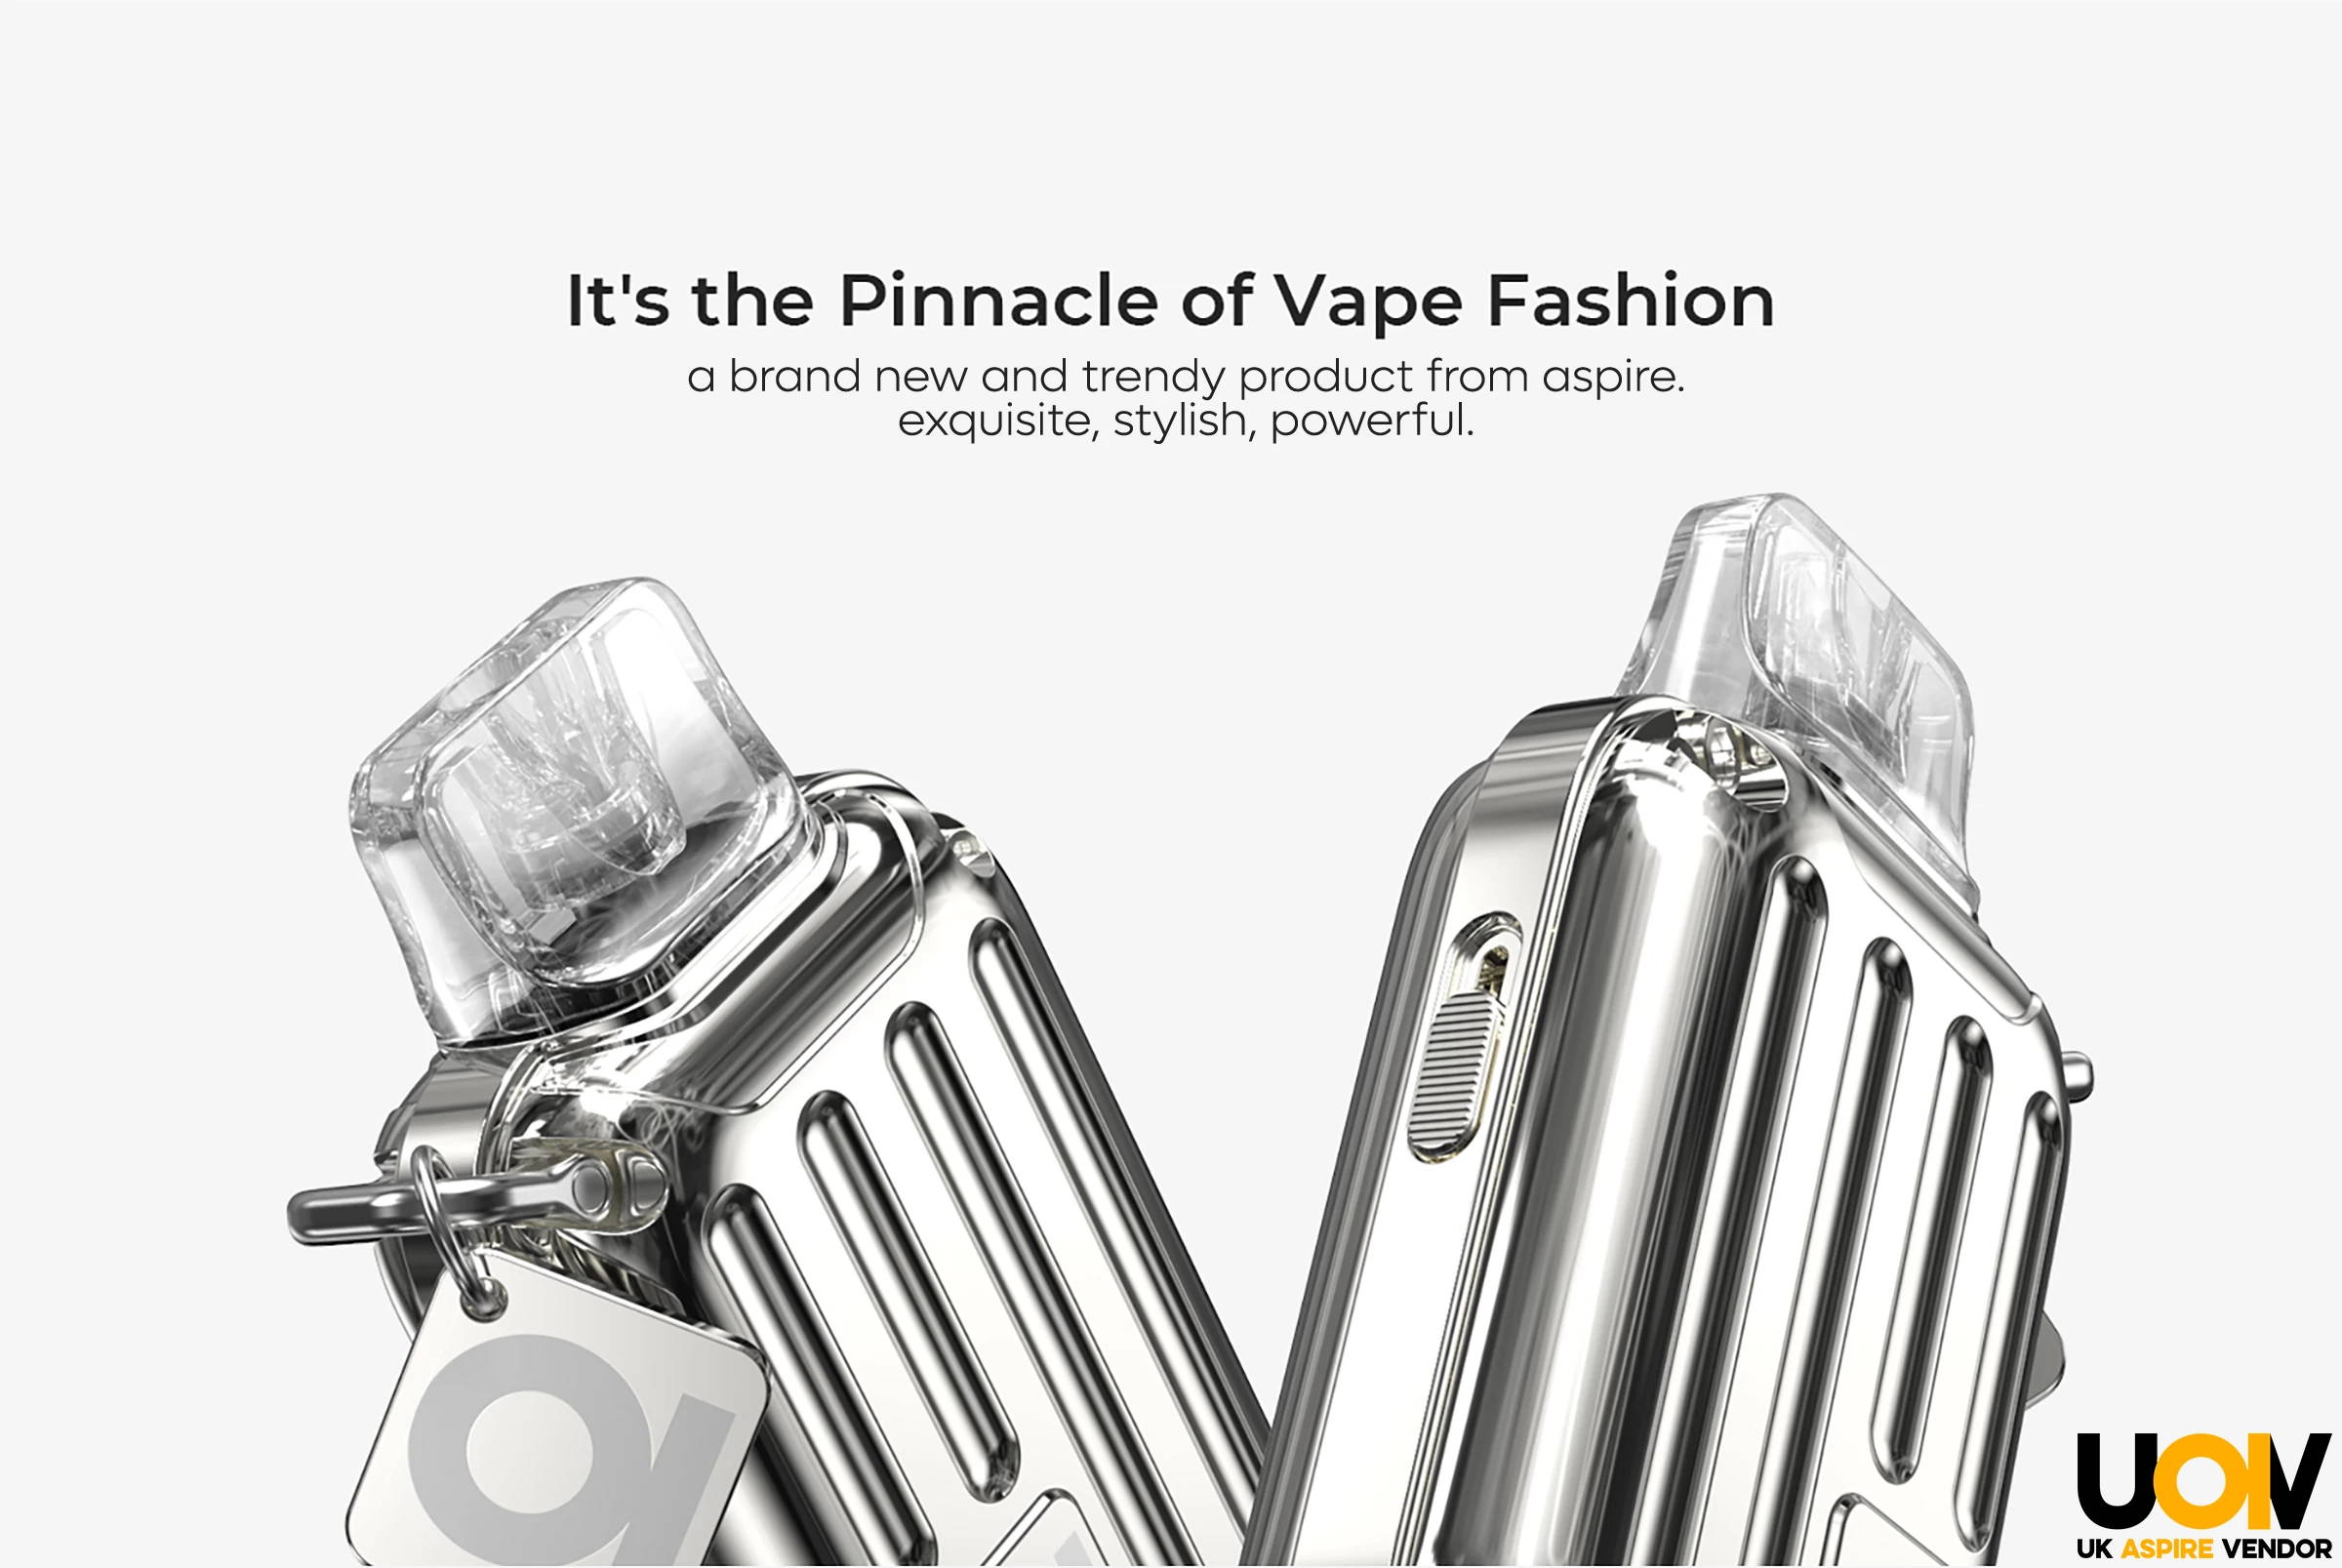 The pinnacle of vape fashion - a brand new and trendy product from aspire. Exquisite, stylish & powerful.